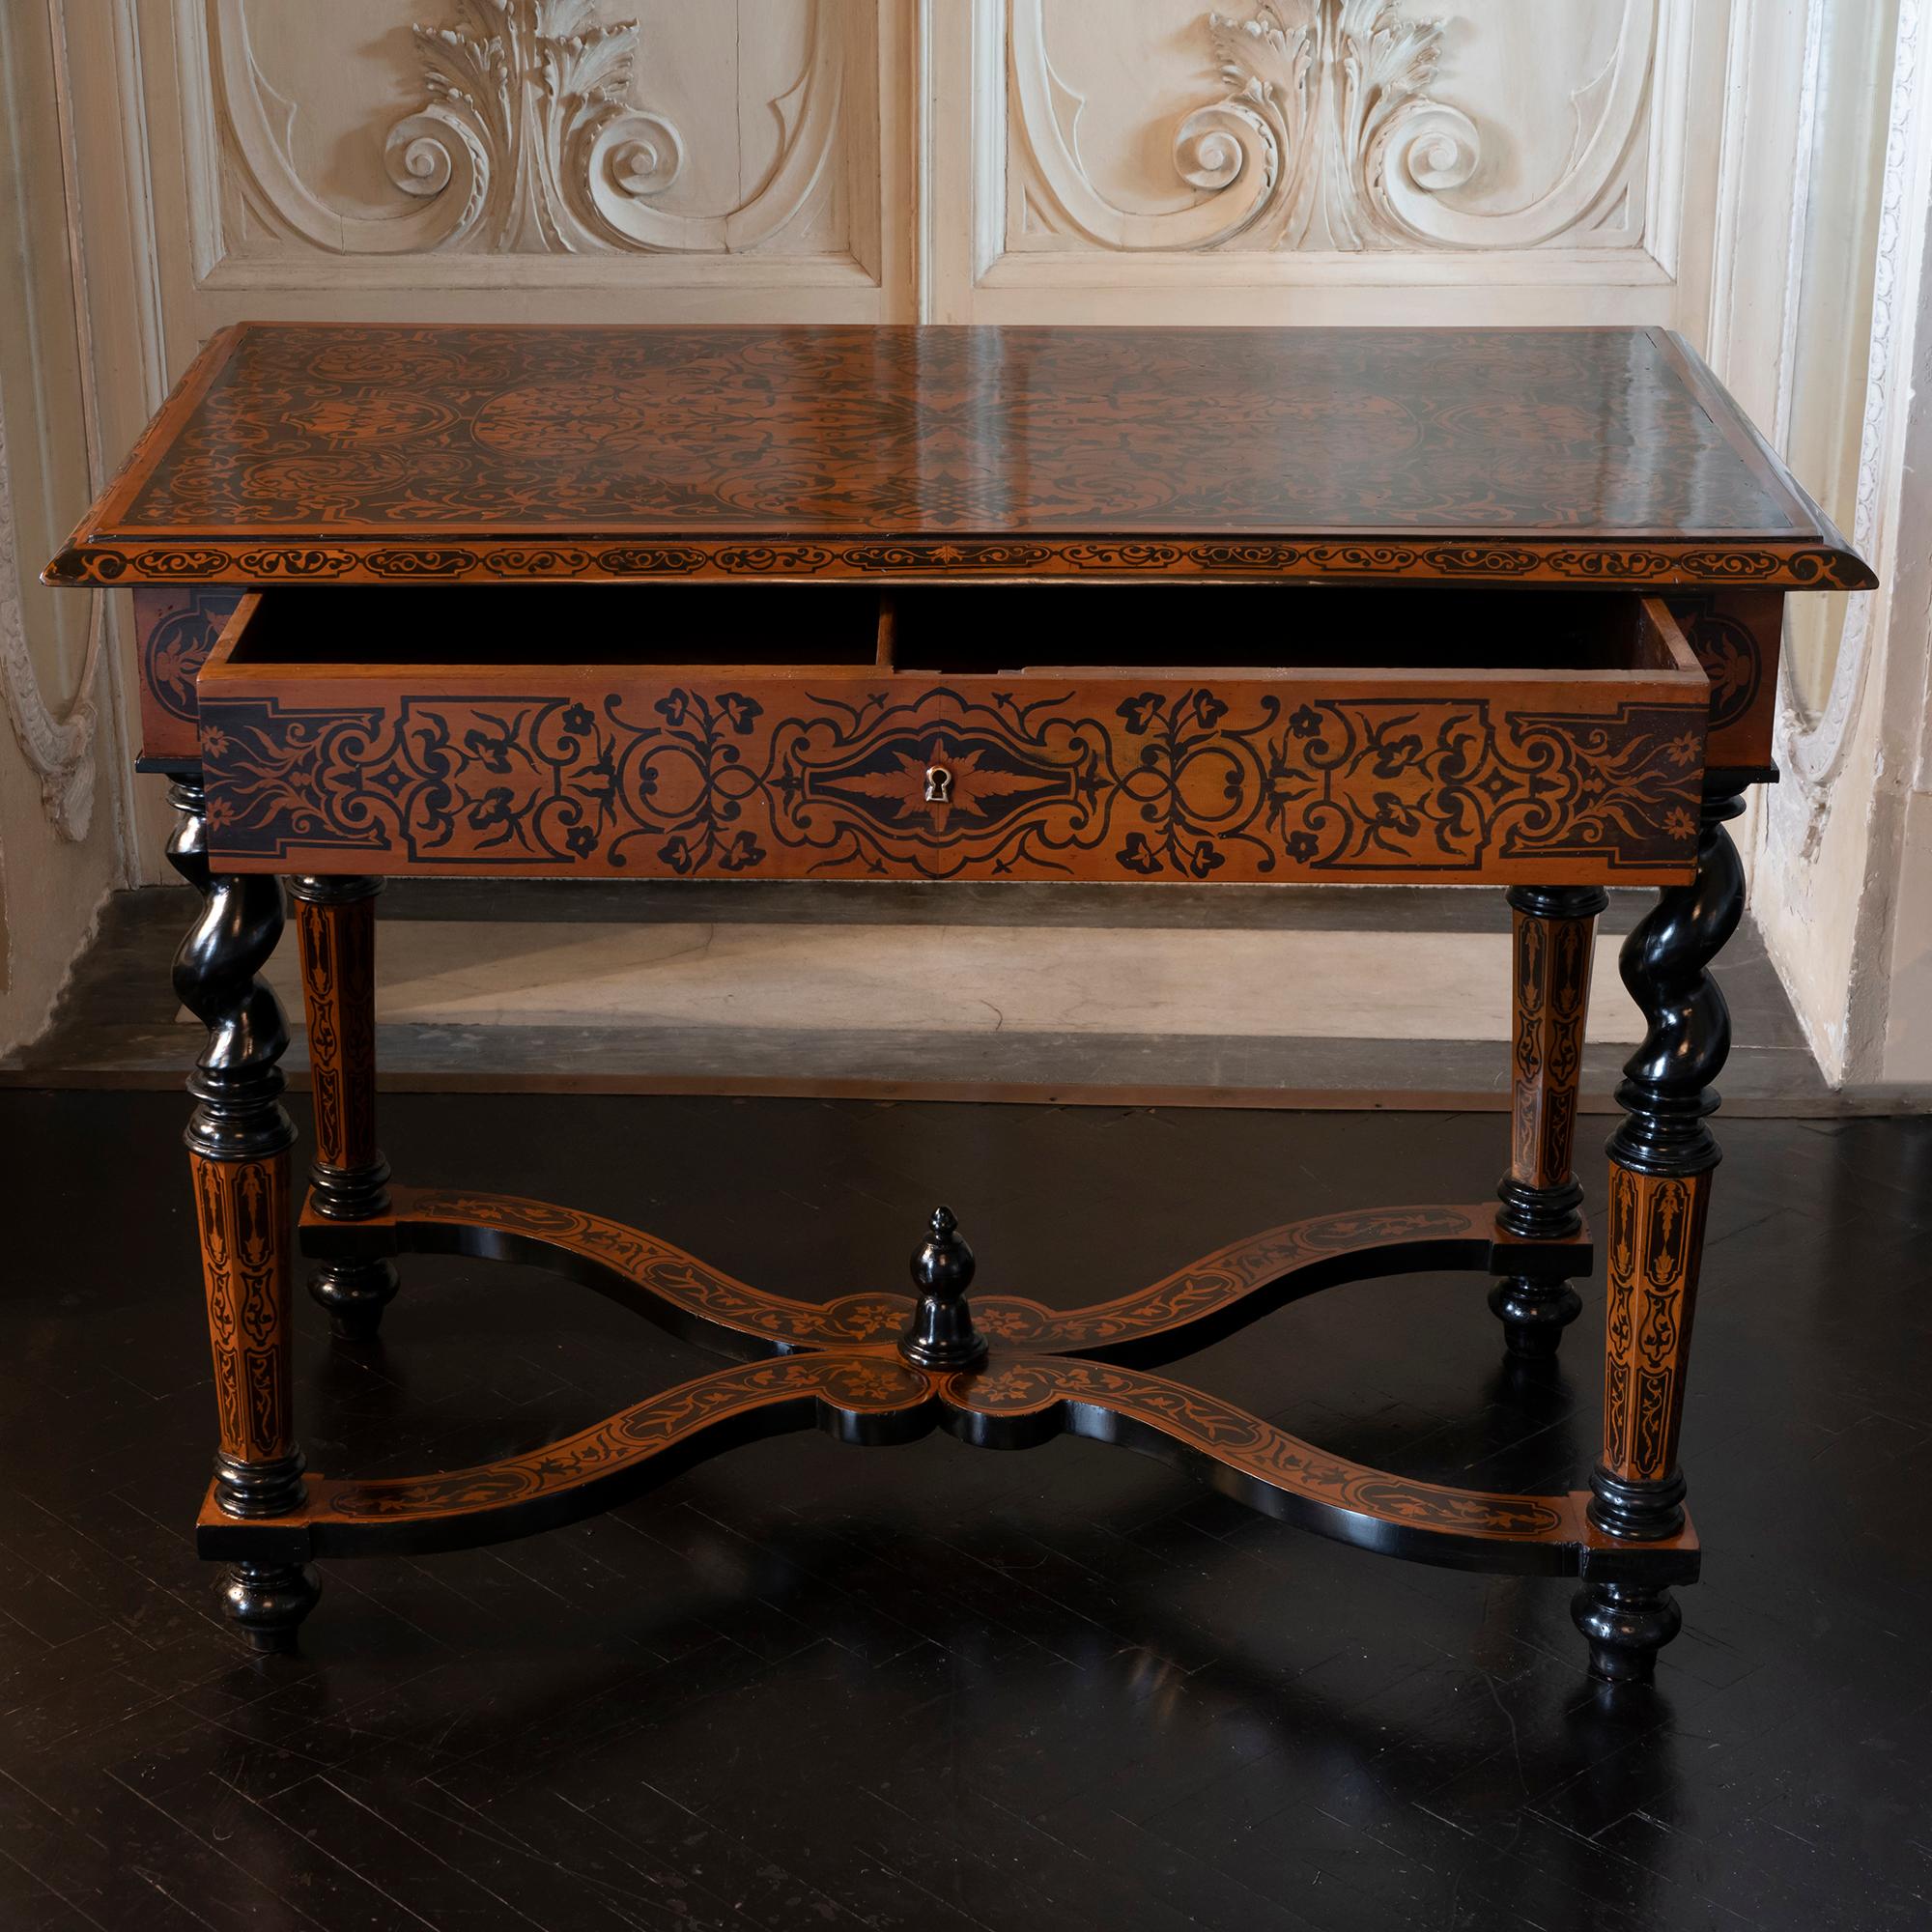 Mid-19th century French writing table Inlaid floral marquetry decoration of walnut and ebonized walnut.
One drawer which is fitted with the original working lock and key, the table stands on turned and marquetry legs joined by inlaid X-stretchers